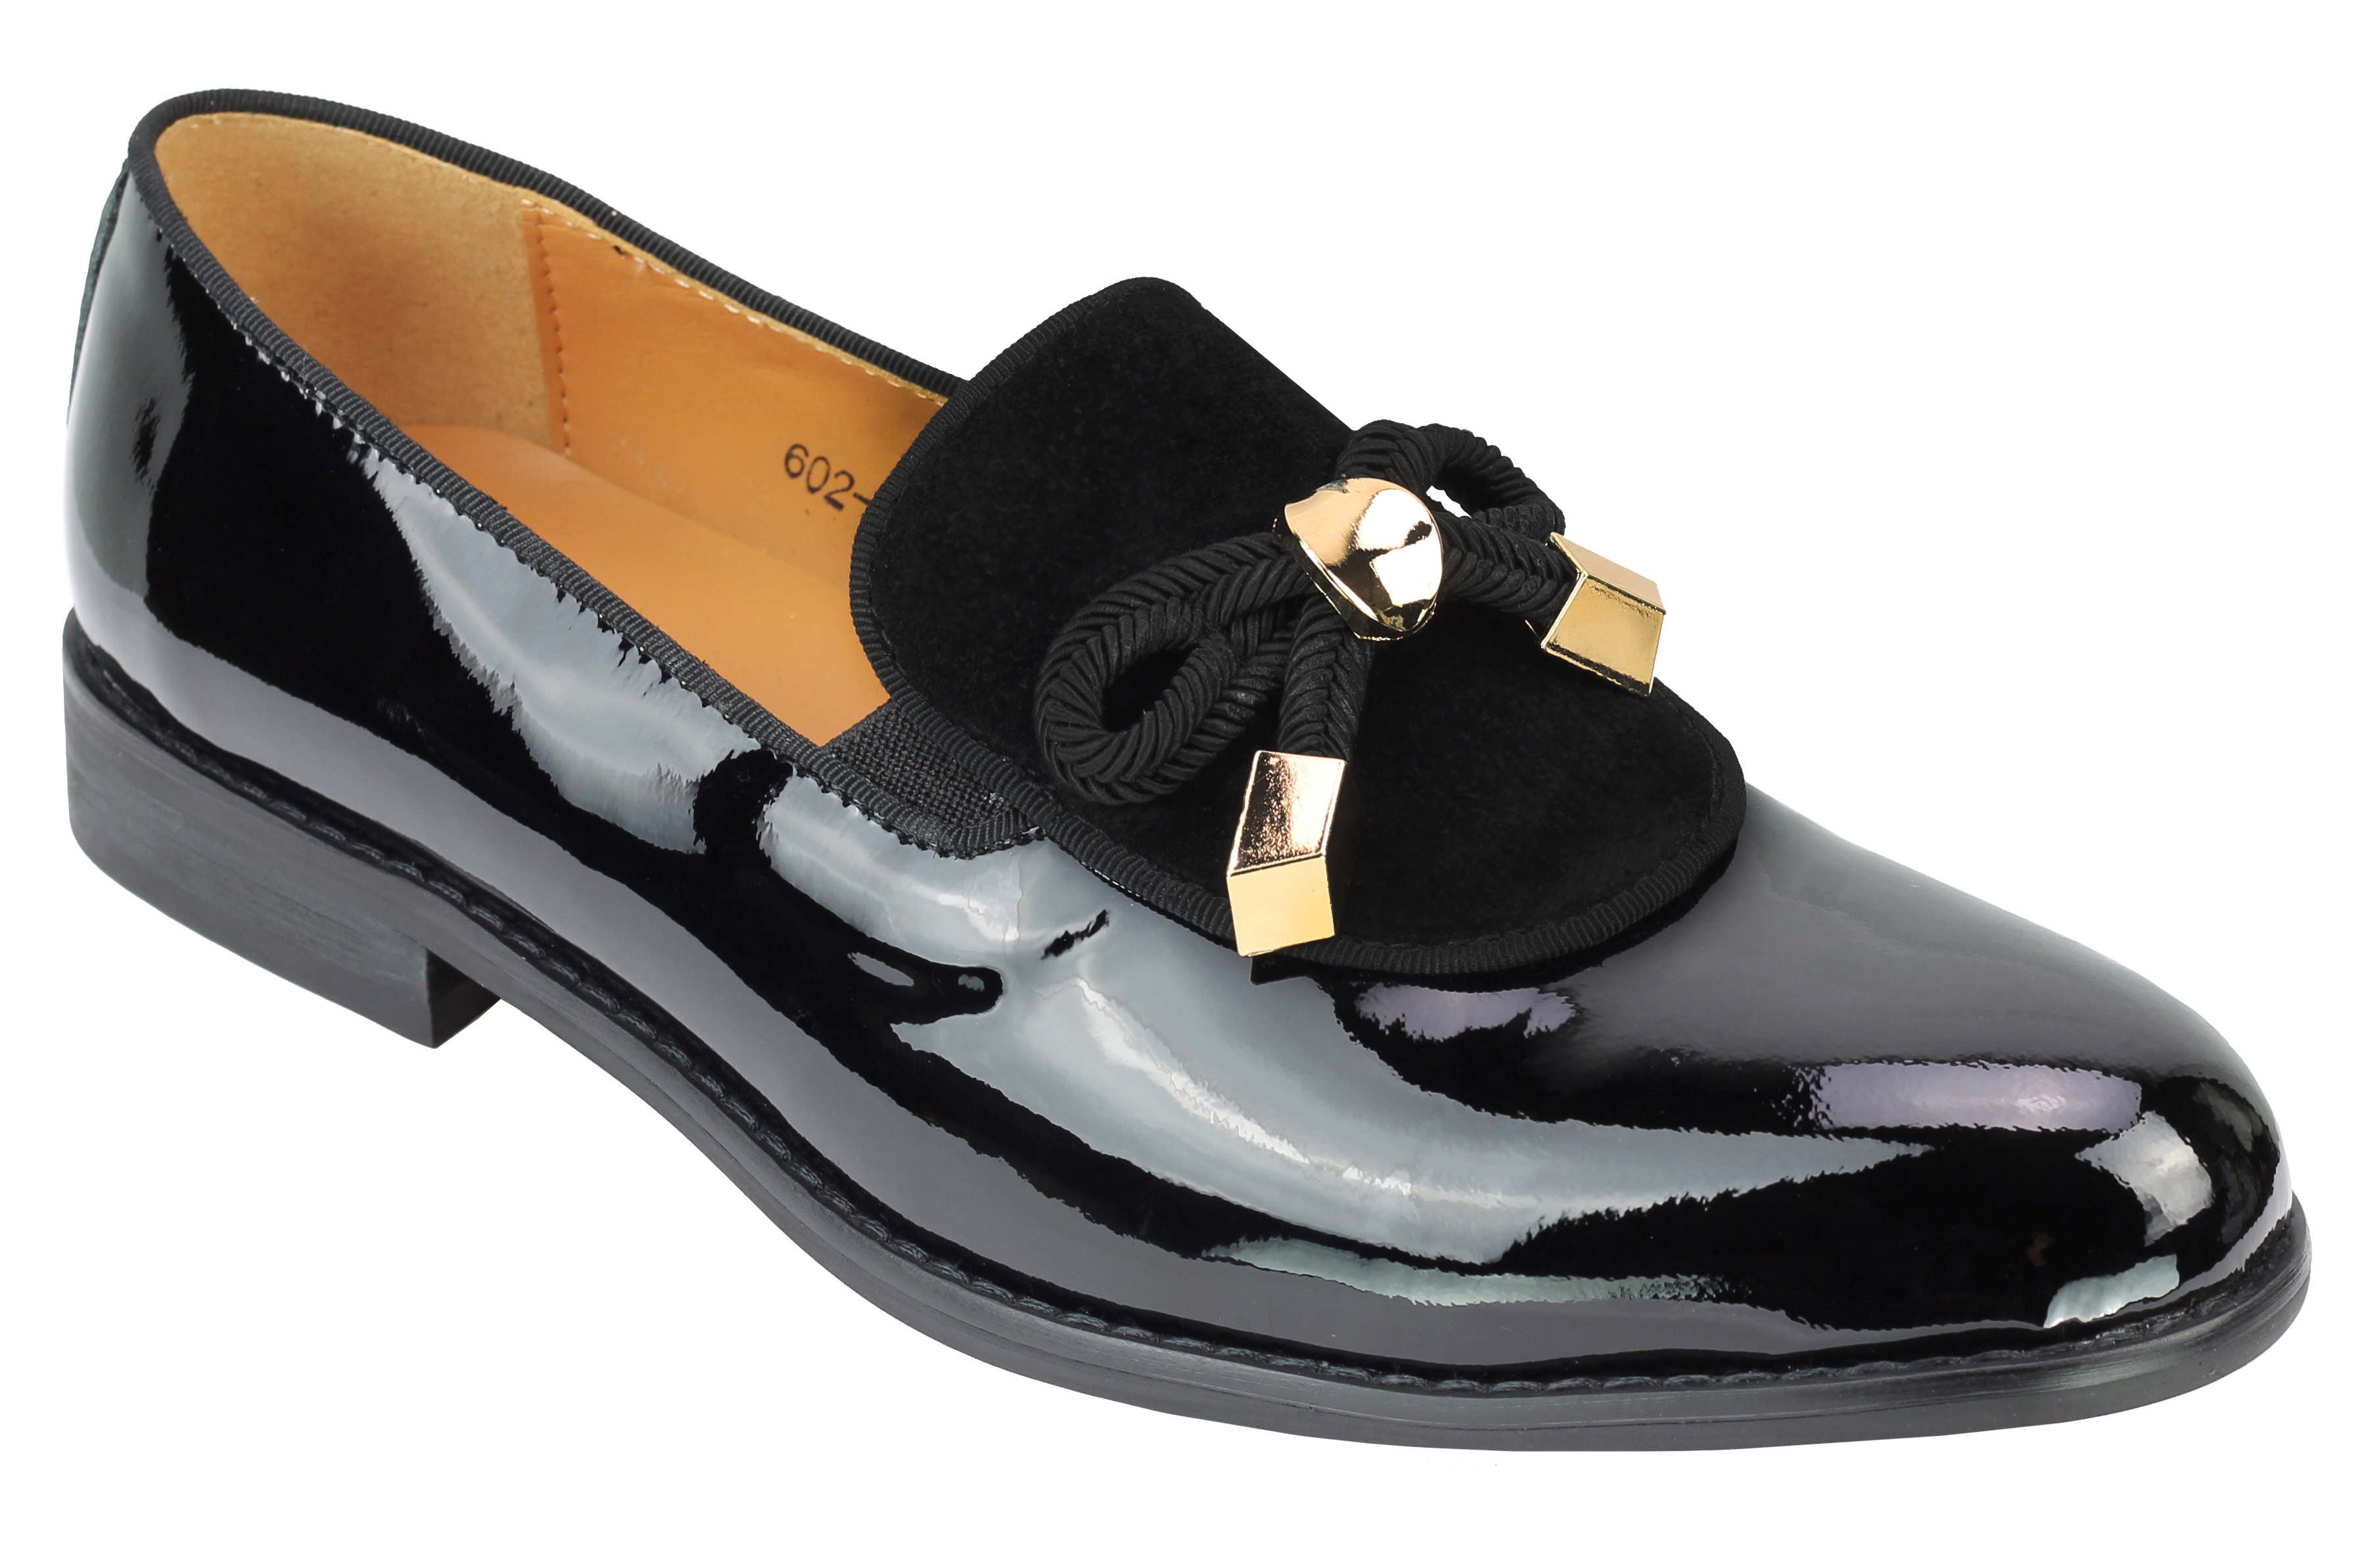 Mens Black Patent Real Leather Glossy Rope Bow Tie Metal Trim Loafers Wedding Party Shoes